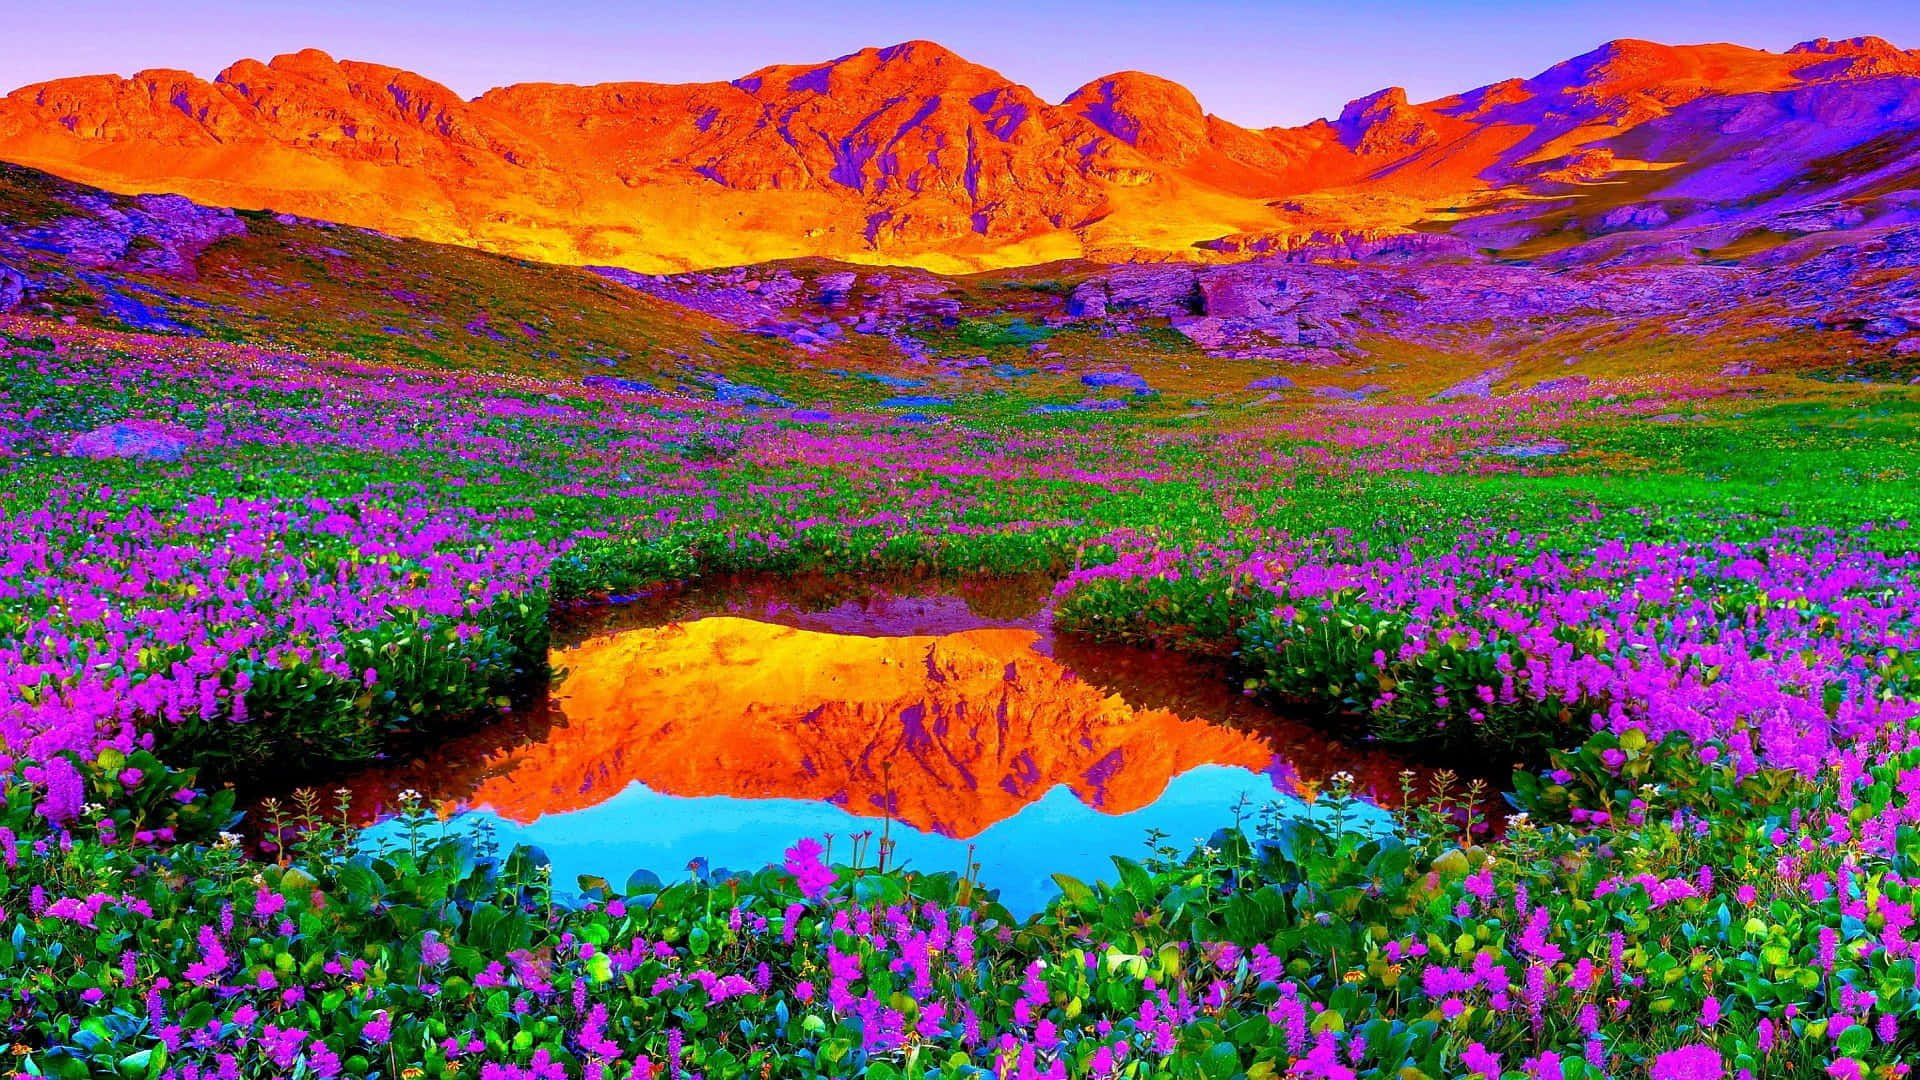 pretty colorful nature backgrounds